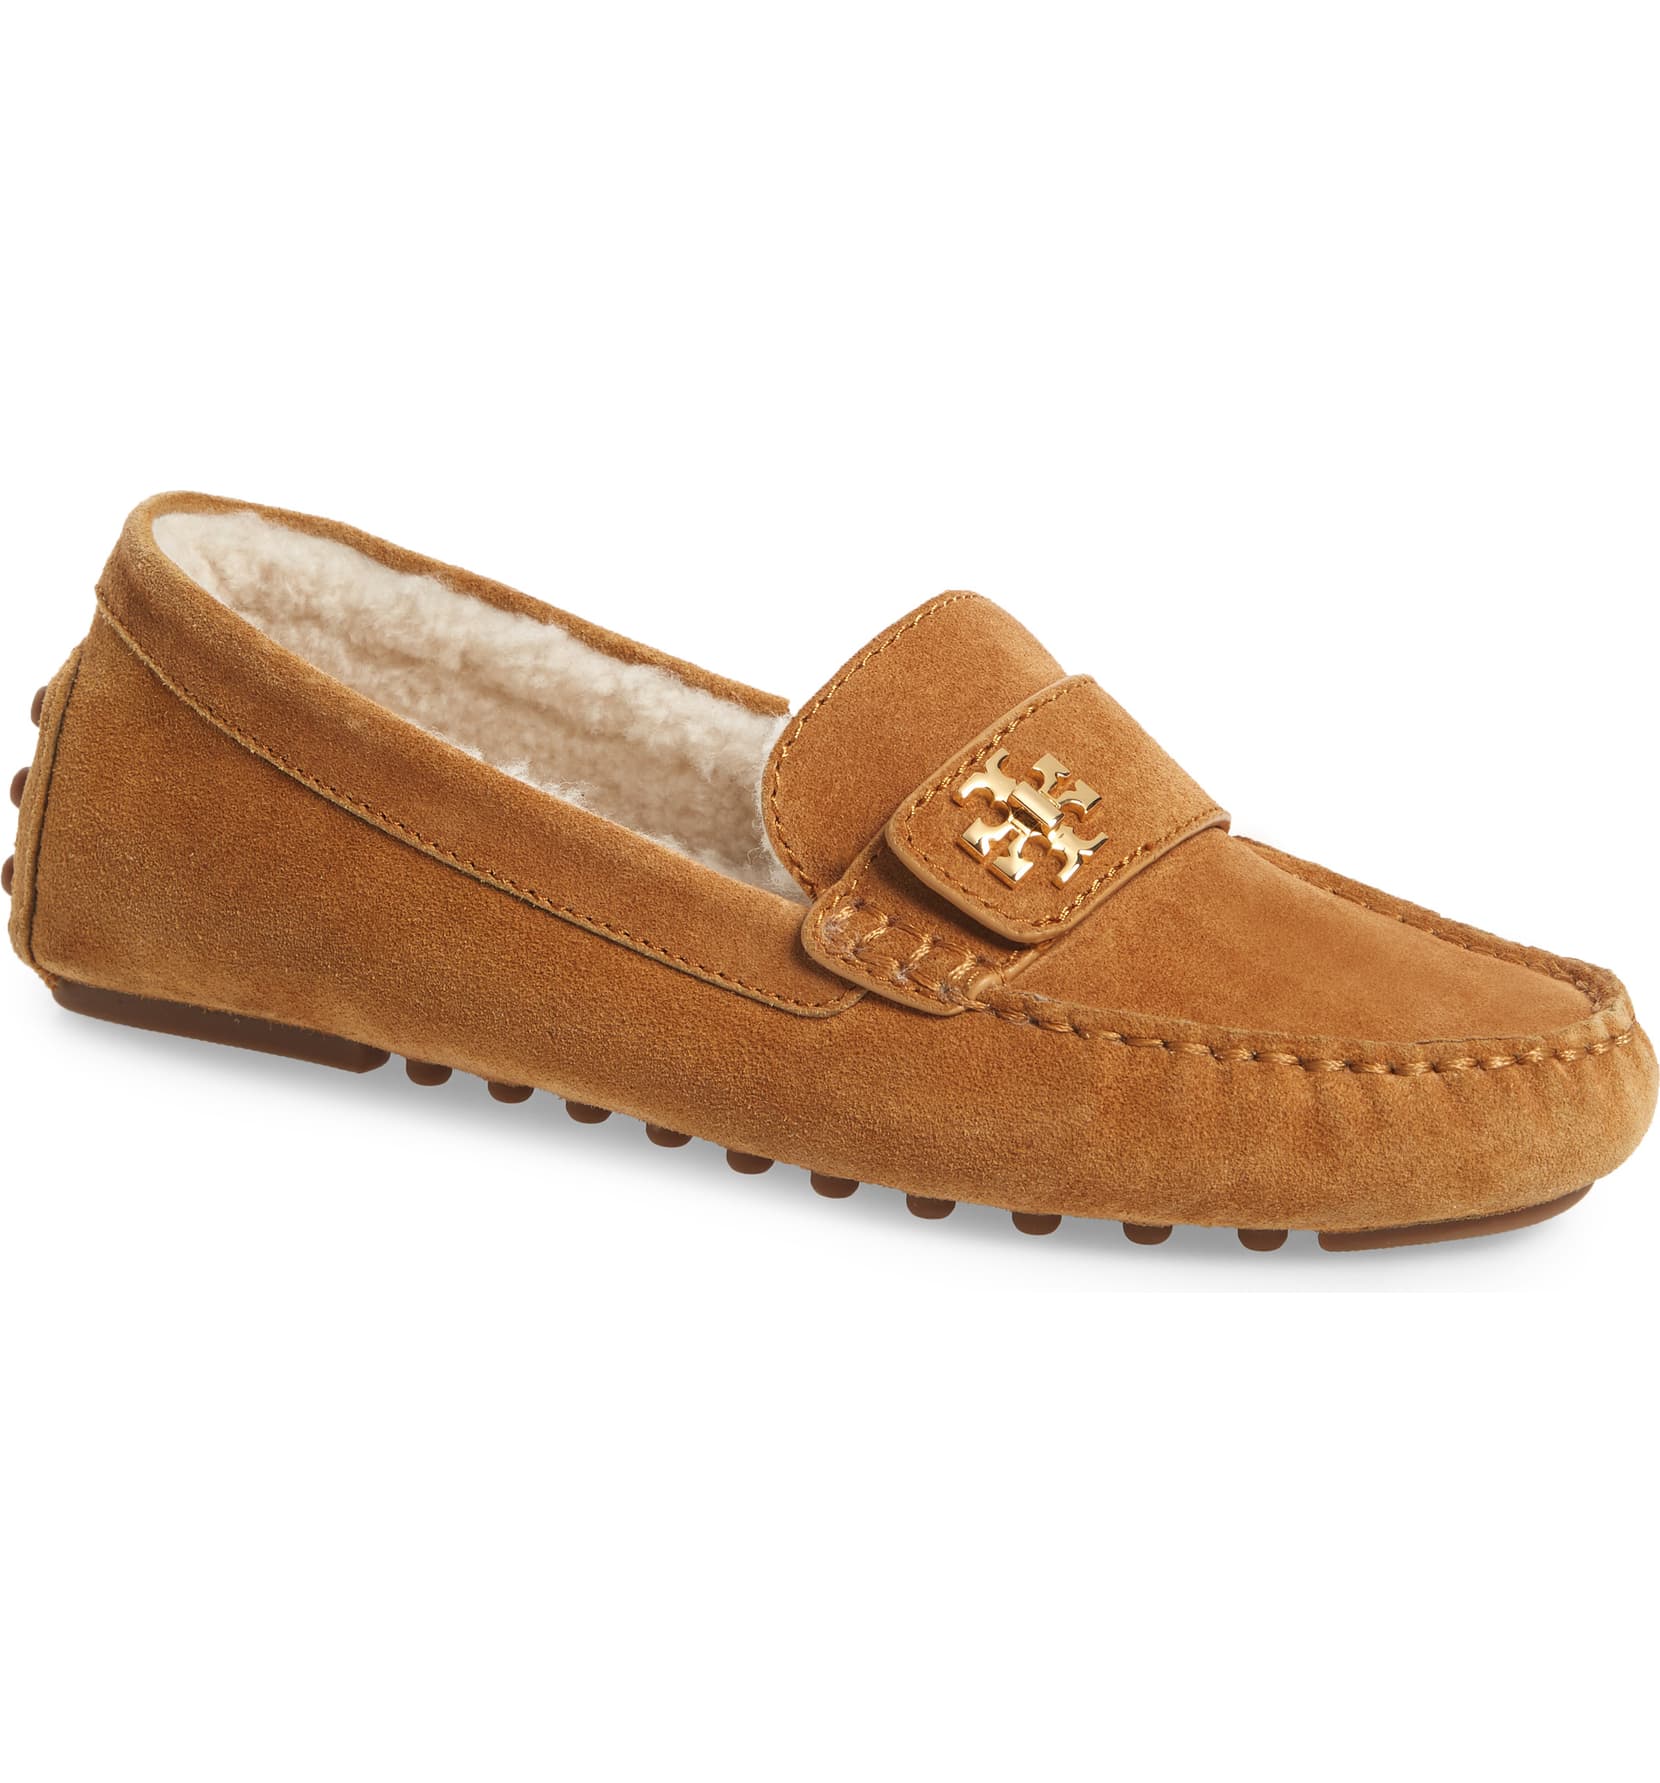 tory burch driving loafer